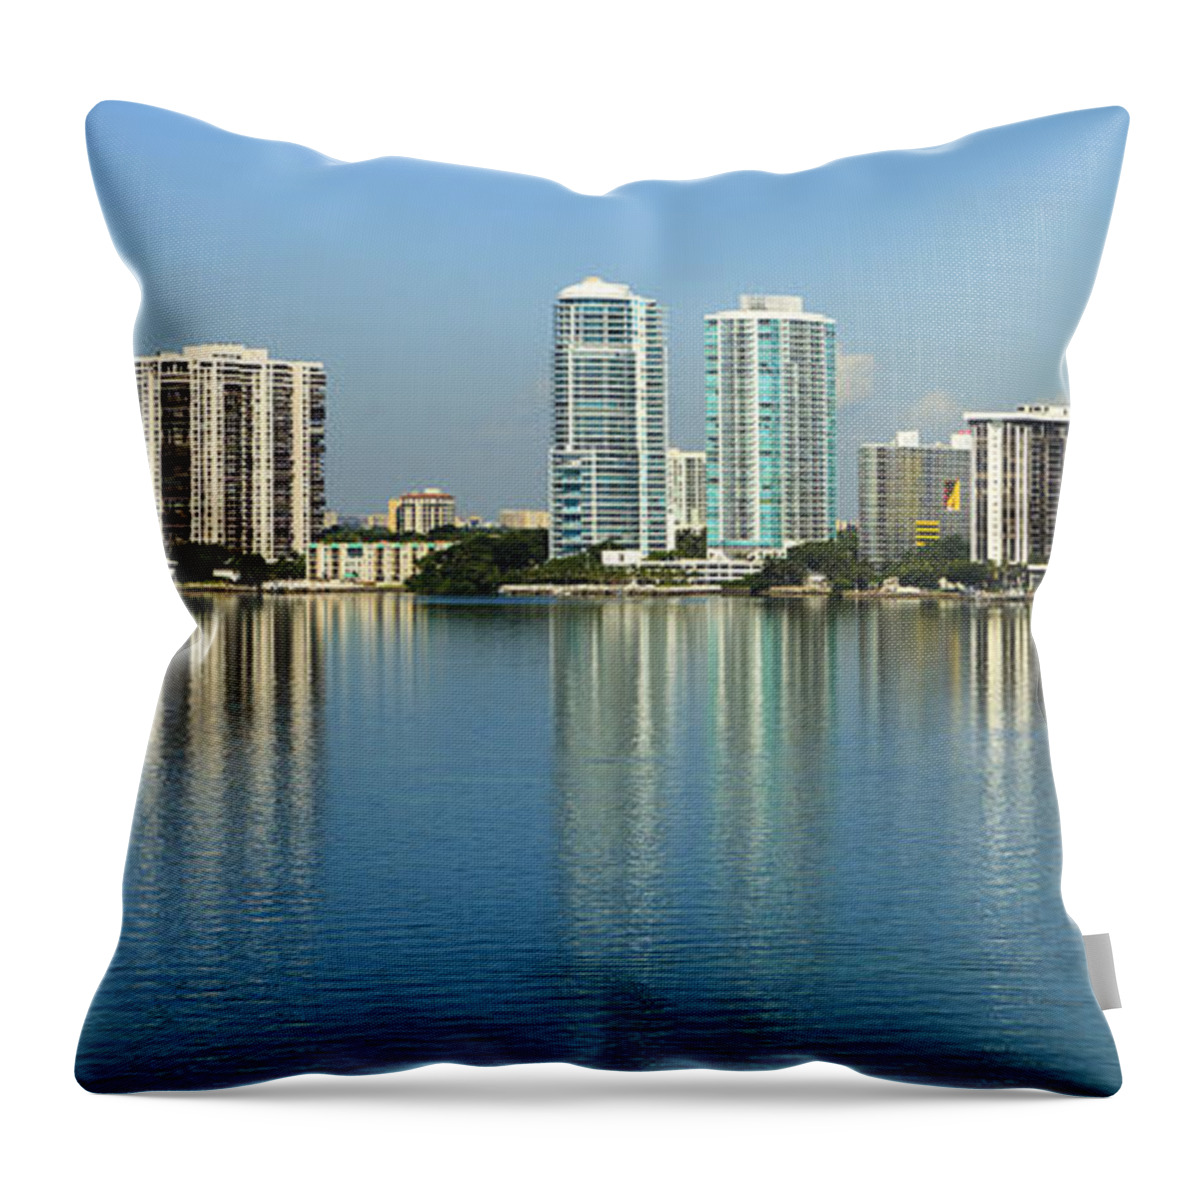 Architecture Throw Pillow featuring the photograph Miami Brickell Skyline by Raul Rodriguez